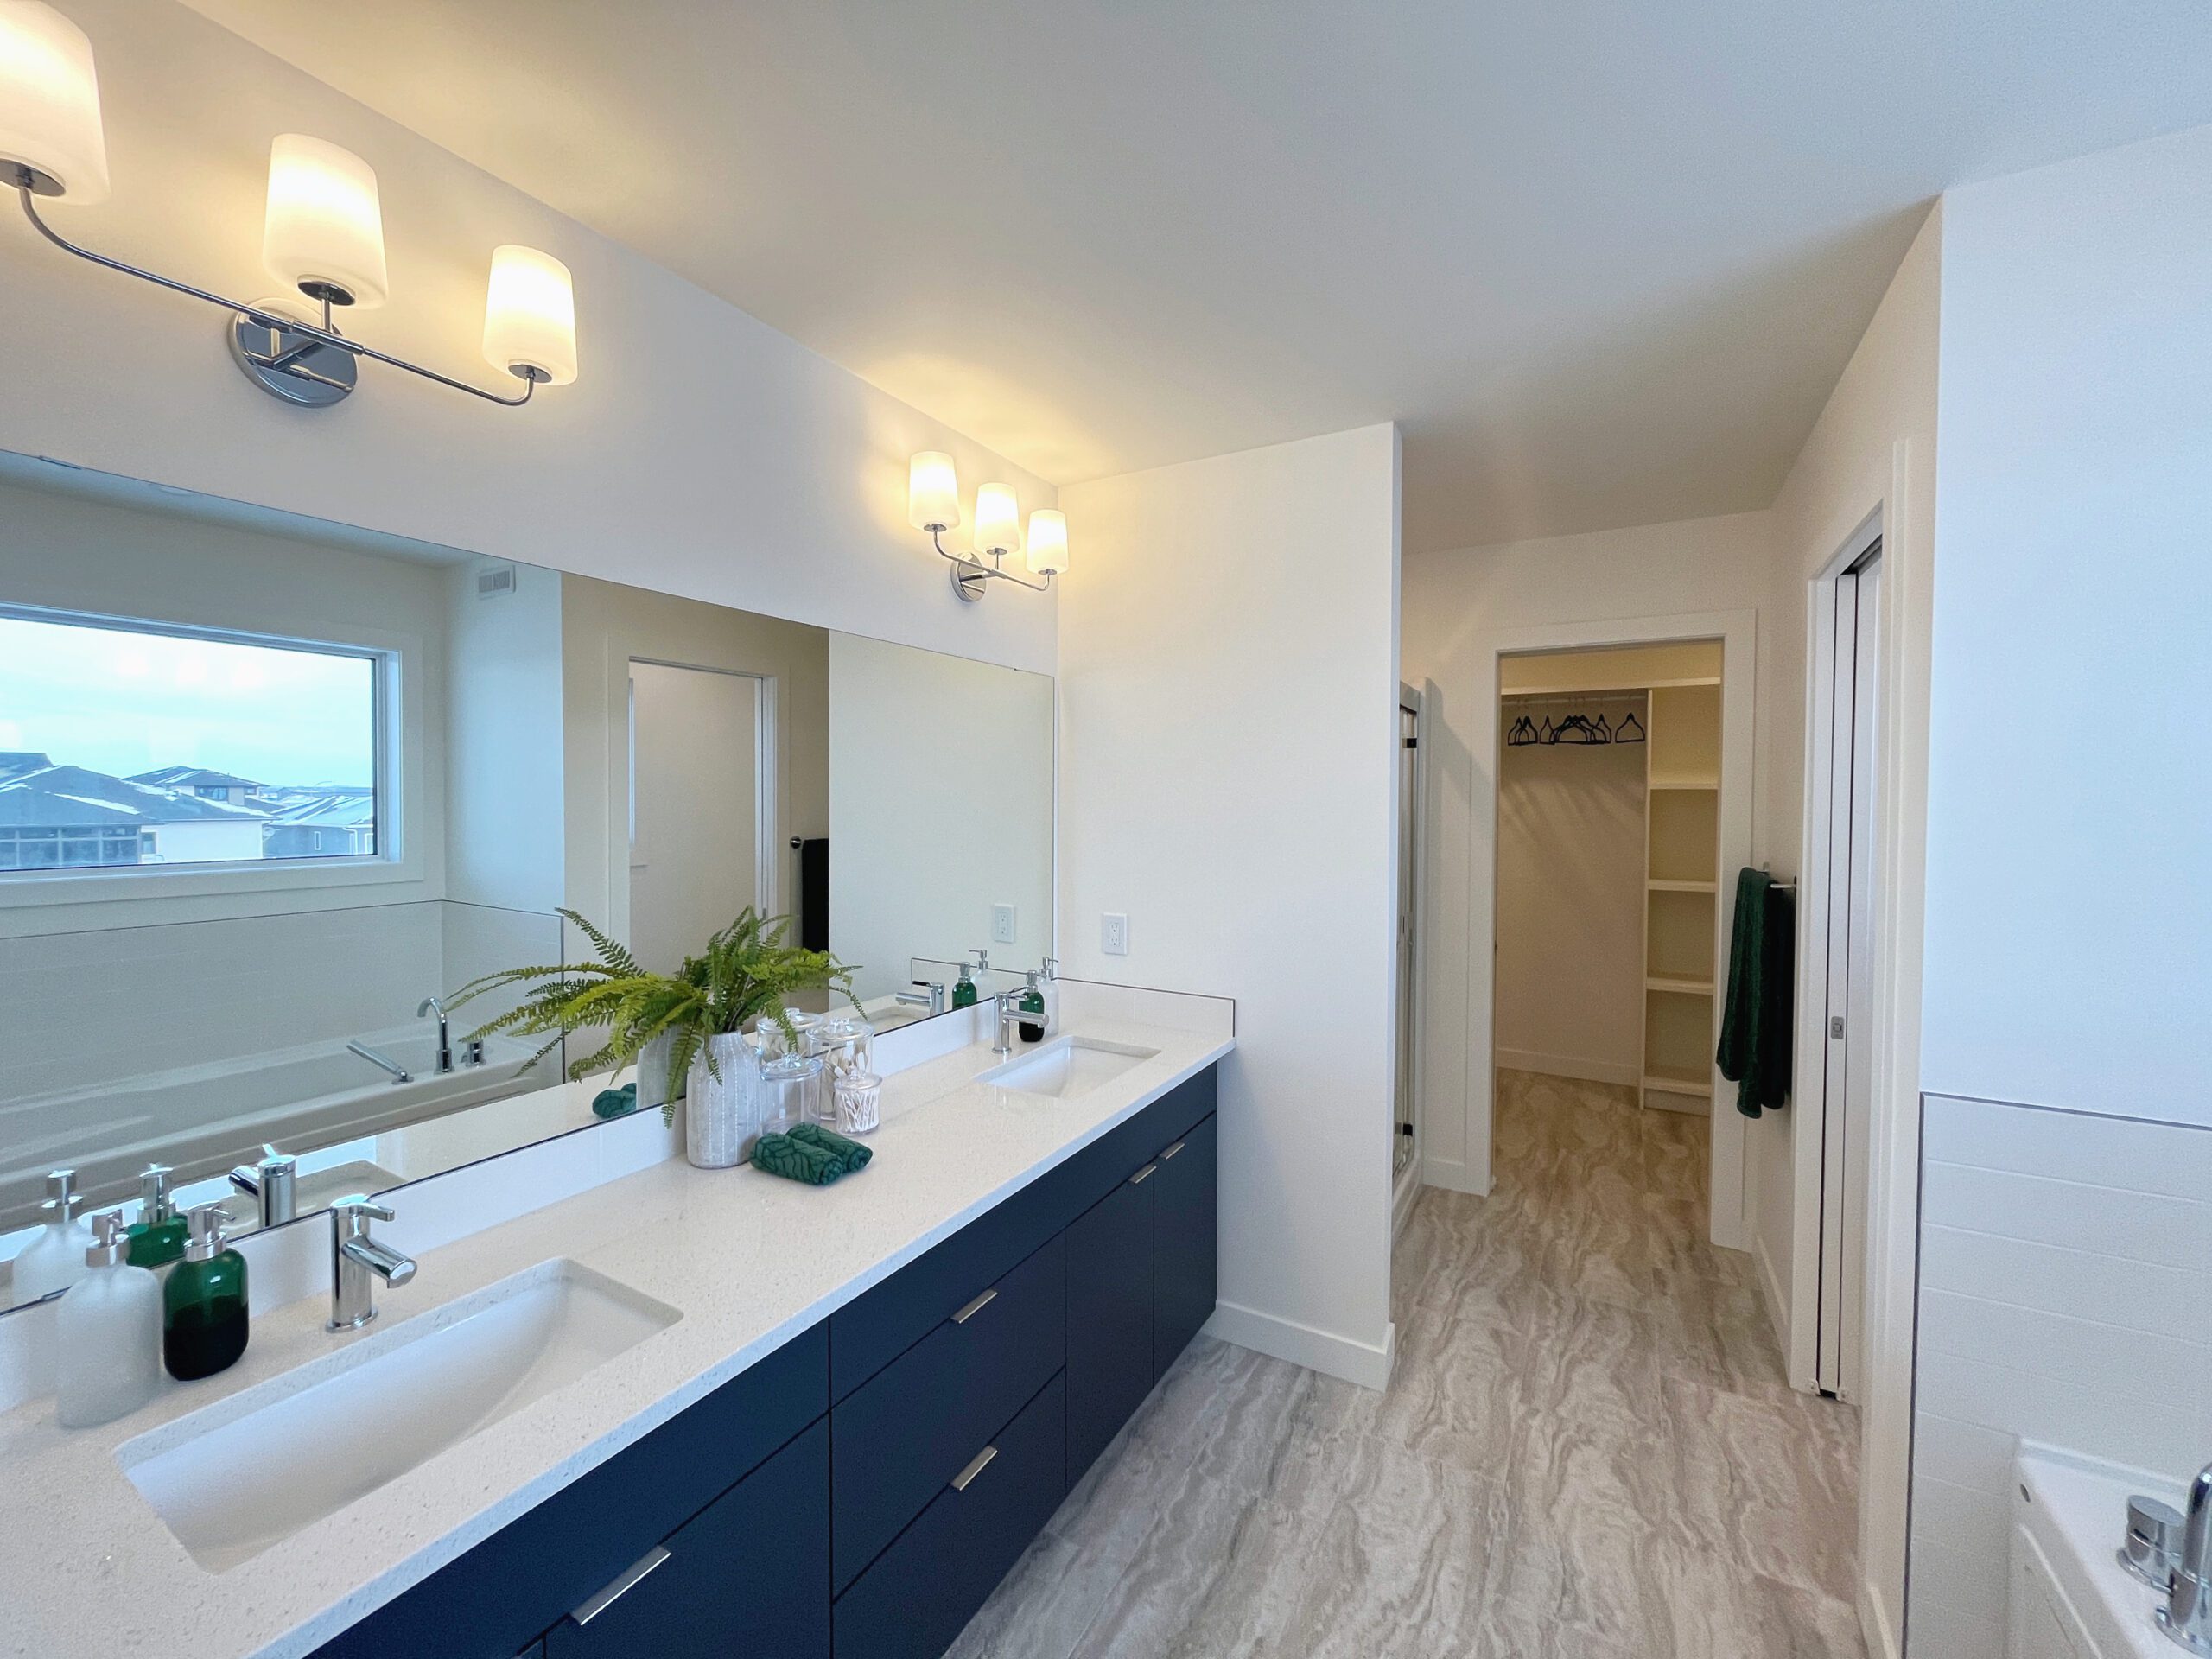 A spacious bathroom with a large mirror and two sinks, located in a luxurious two-storey home in Pilot Butte.